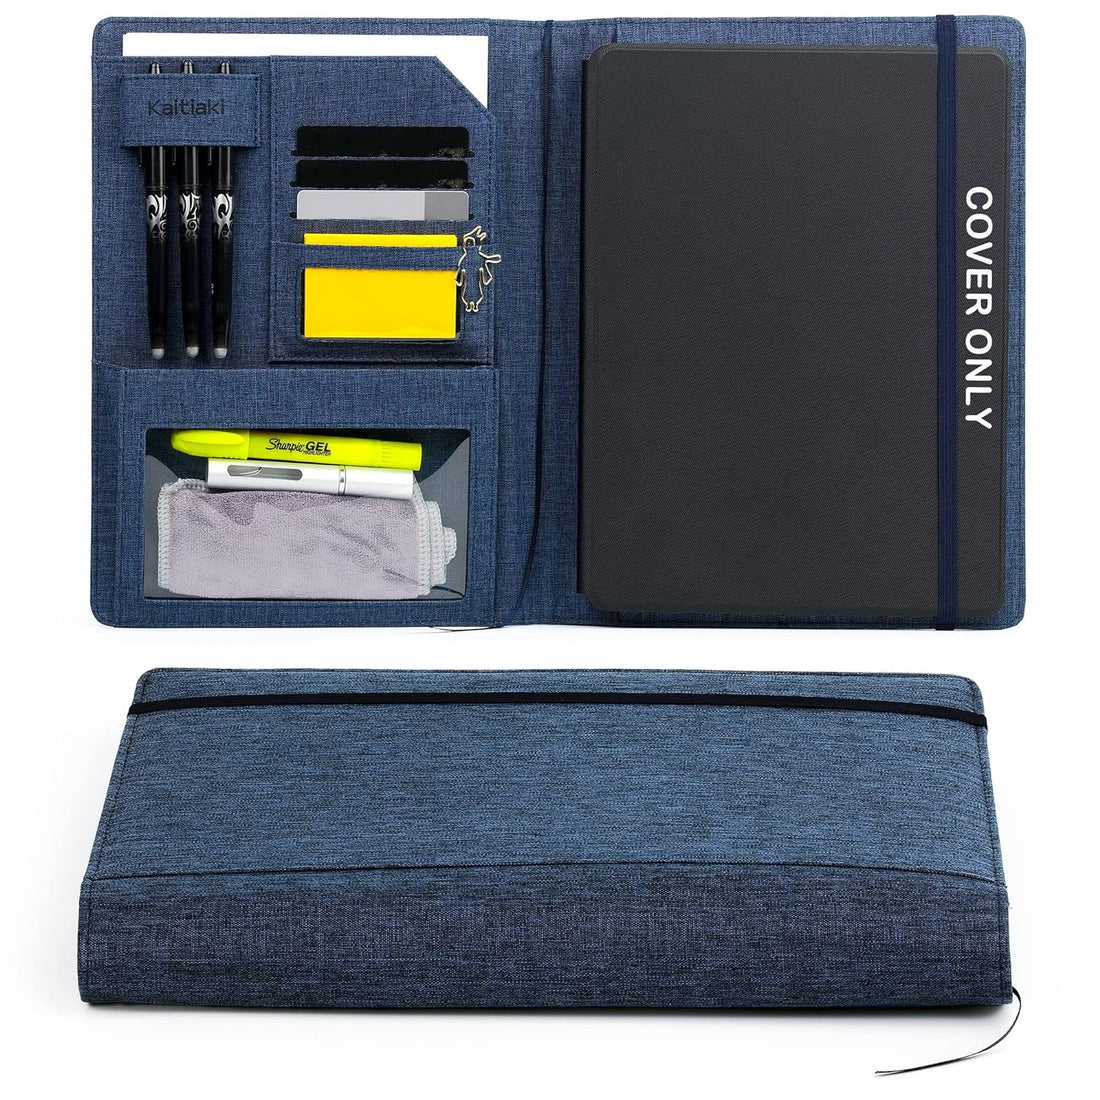 Folio Cover for Rocketbook Everlast Fusion - Letter Size, Multi Organizer with Pen Loop, Business Card Holder, Zipper Pocket Support Mini Size Rocketbook, Waterproof Fabric, 11 x 9 inch, Blue